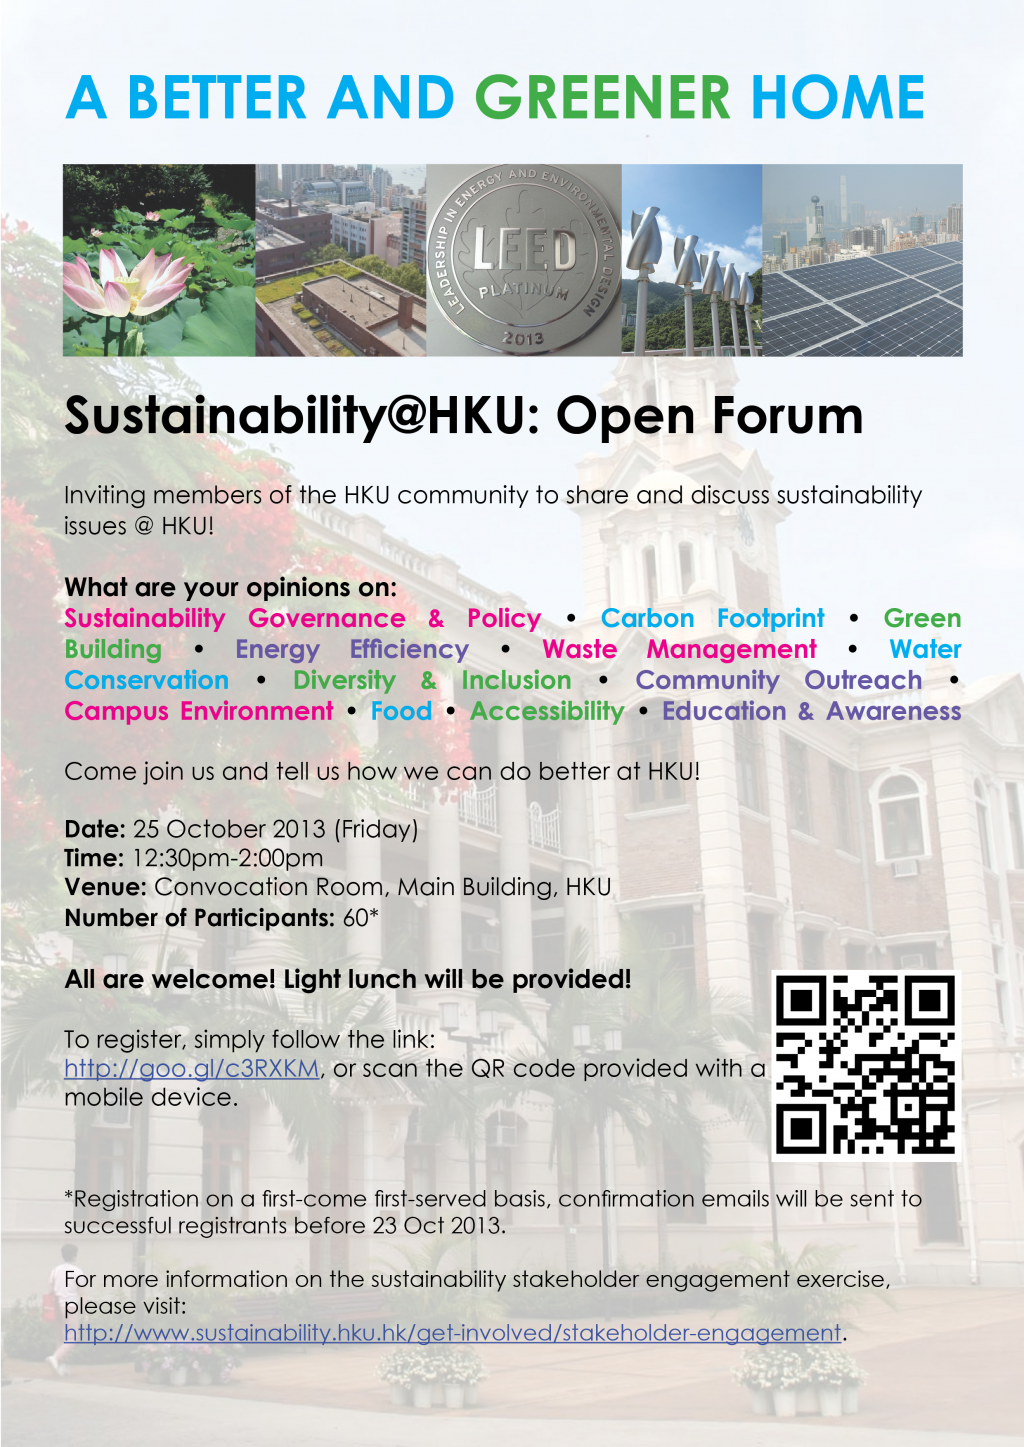 A Better and Greener HKU - Open Forum